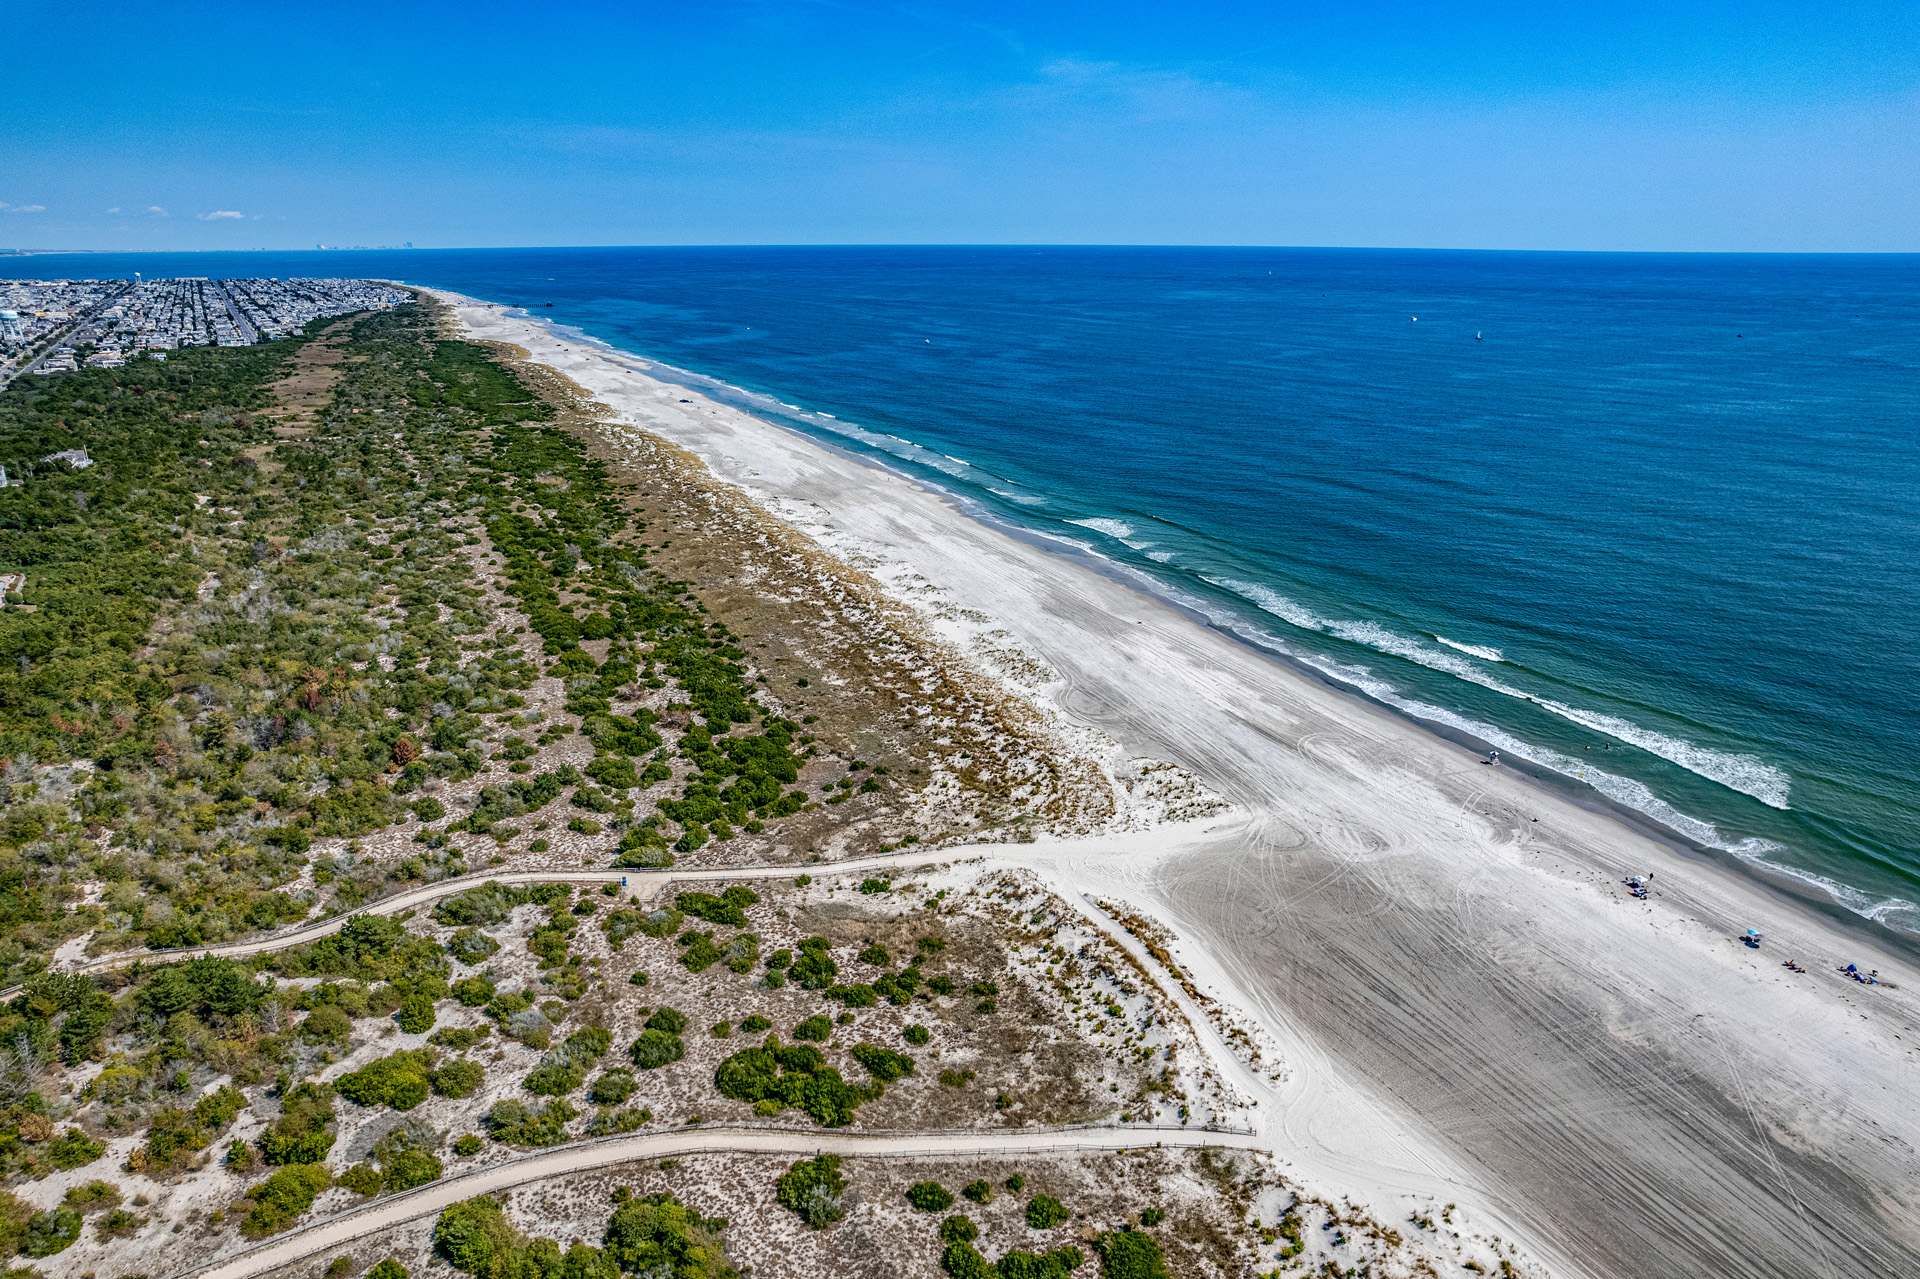 Embrace Nature and Serenity of the High Dunes in Avalon, NJ